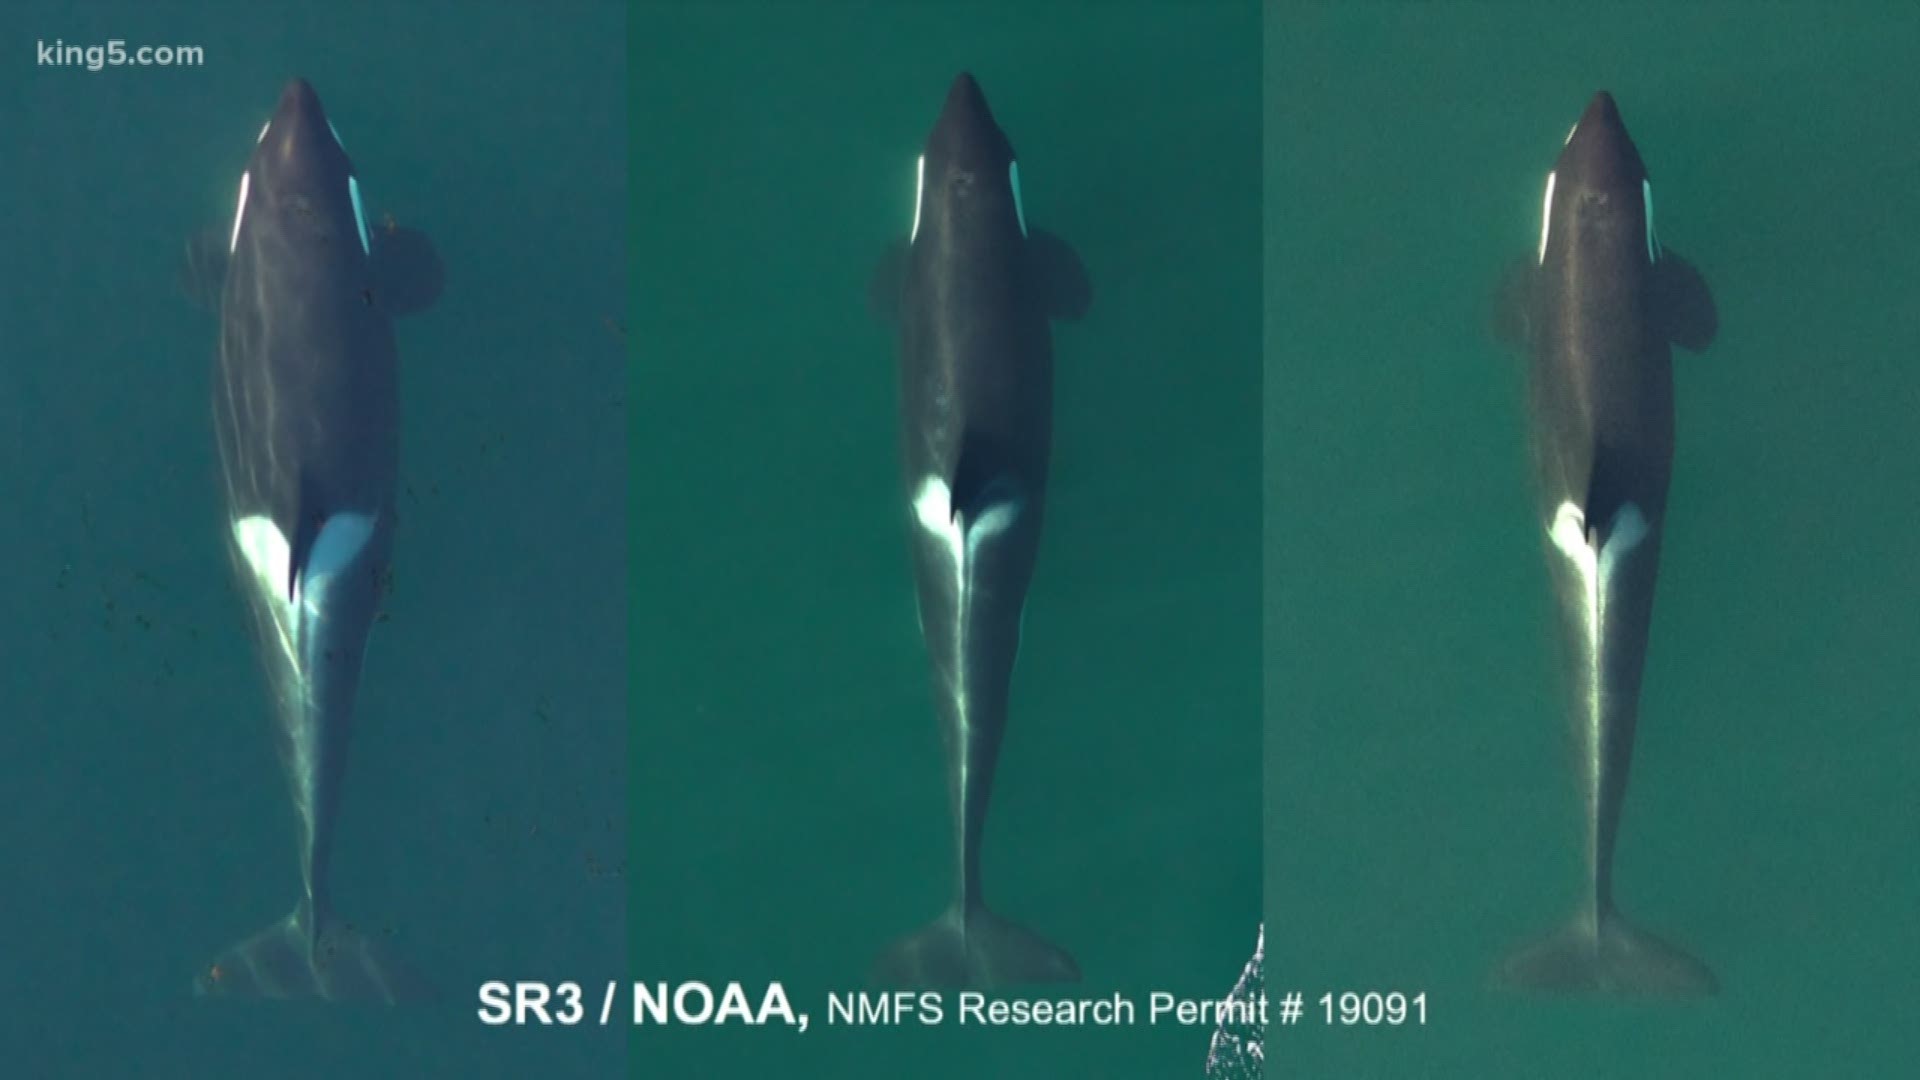 One of puget sound's leading experts on the southern resident killer whales says two more will likely die by this summer.
    Last September we told you about K-25, a male orca suffering from a condition called peanut head.
     KING 5 Environmental Reporter Alison Morrow has an update on him, and the latest female orca identified with the same condition.